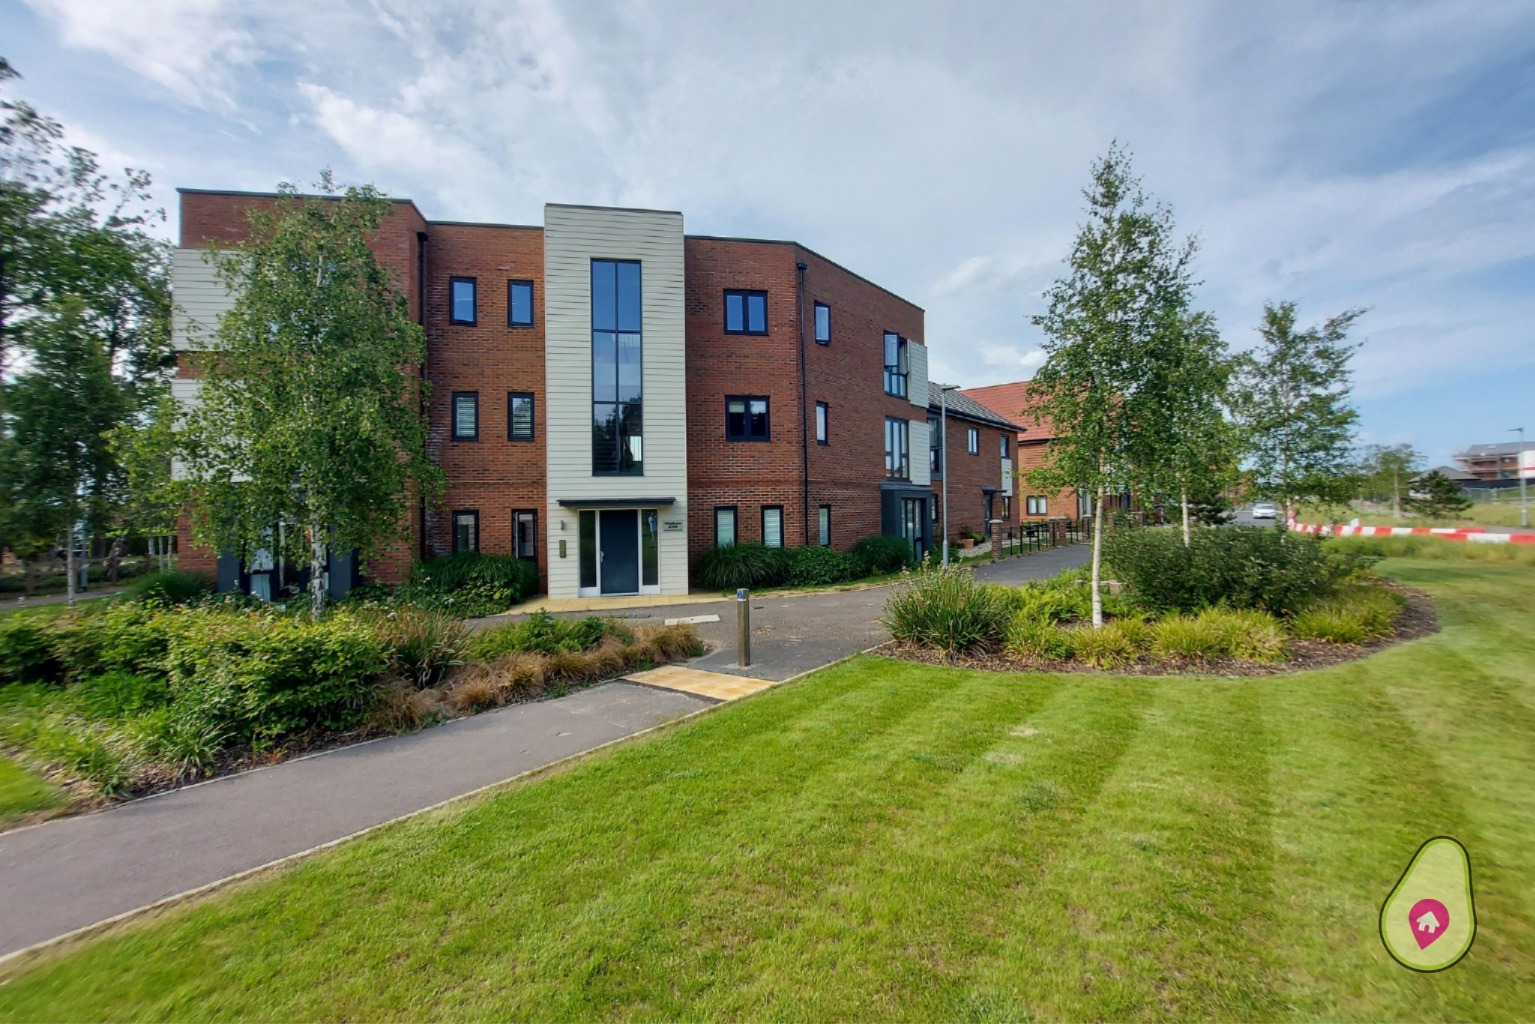 This Impressive high specification apartment with Bucklers Forest on the doorstep has so much to offer, whilst being within walking distance of Crowthorne High Street. Having been built in 2018 by Legal and General Homes, it really is in immaculate condition throughout with allocated parking